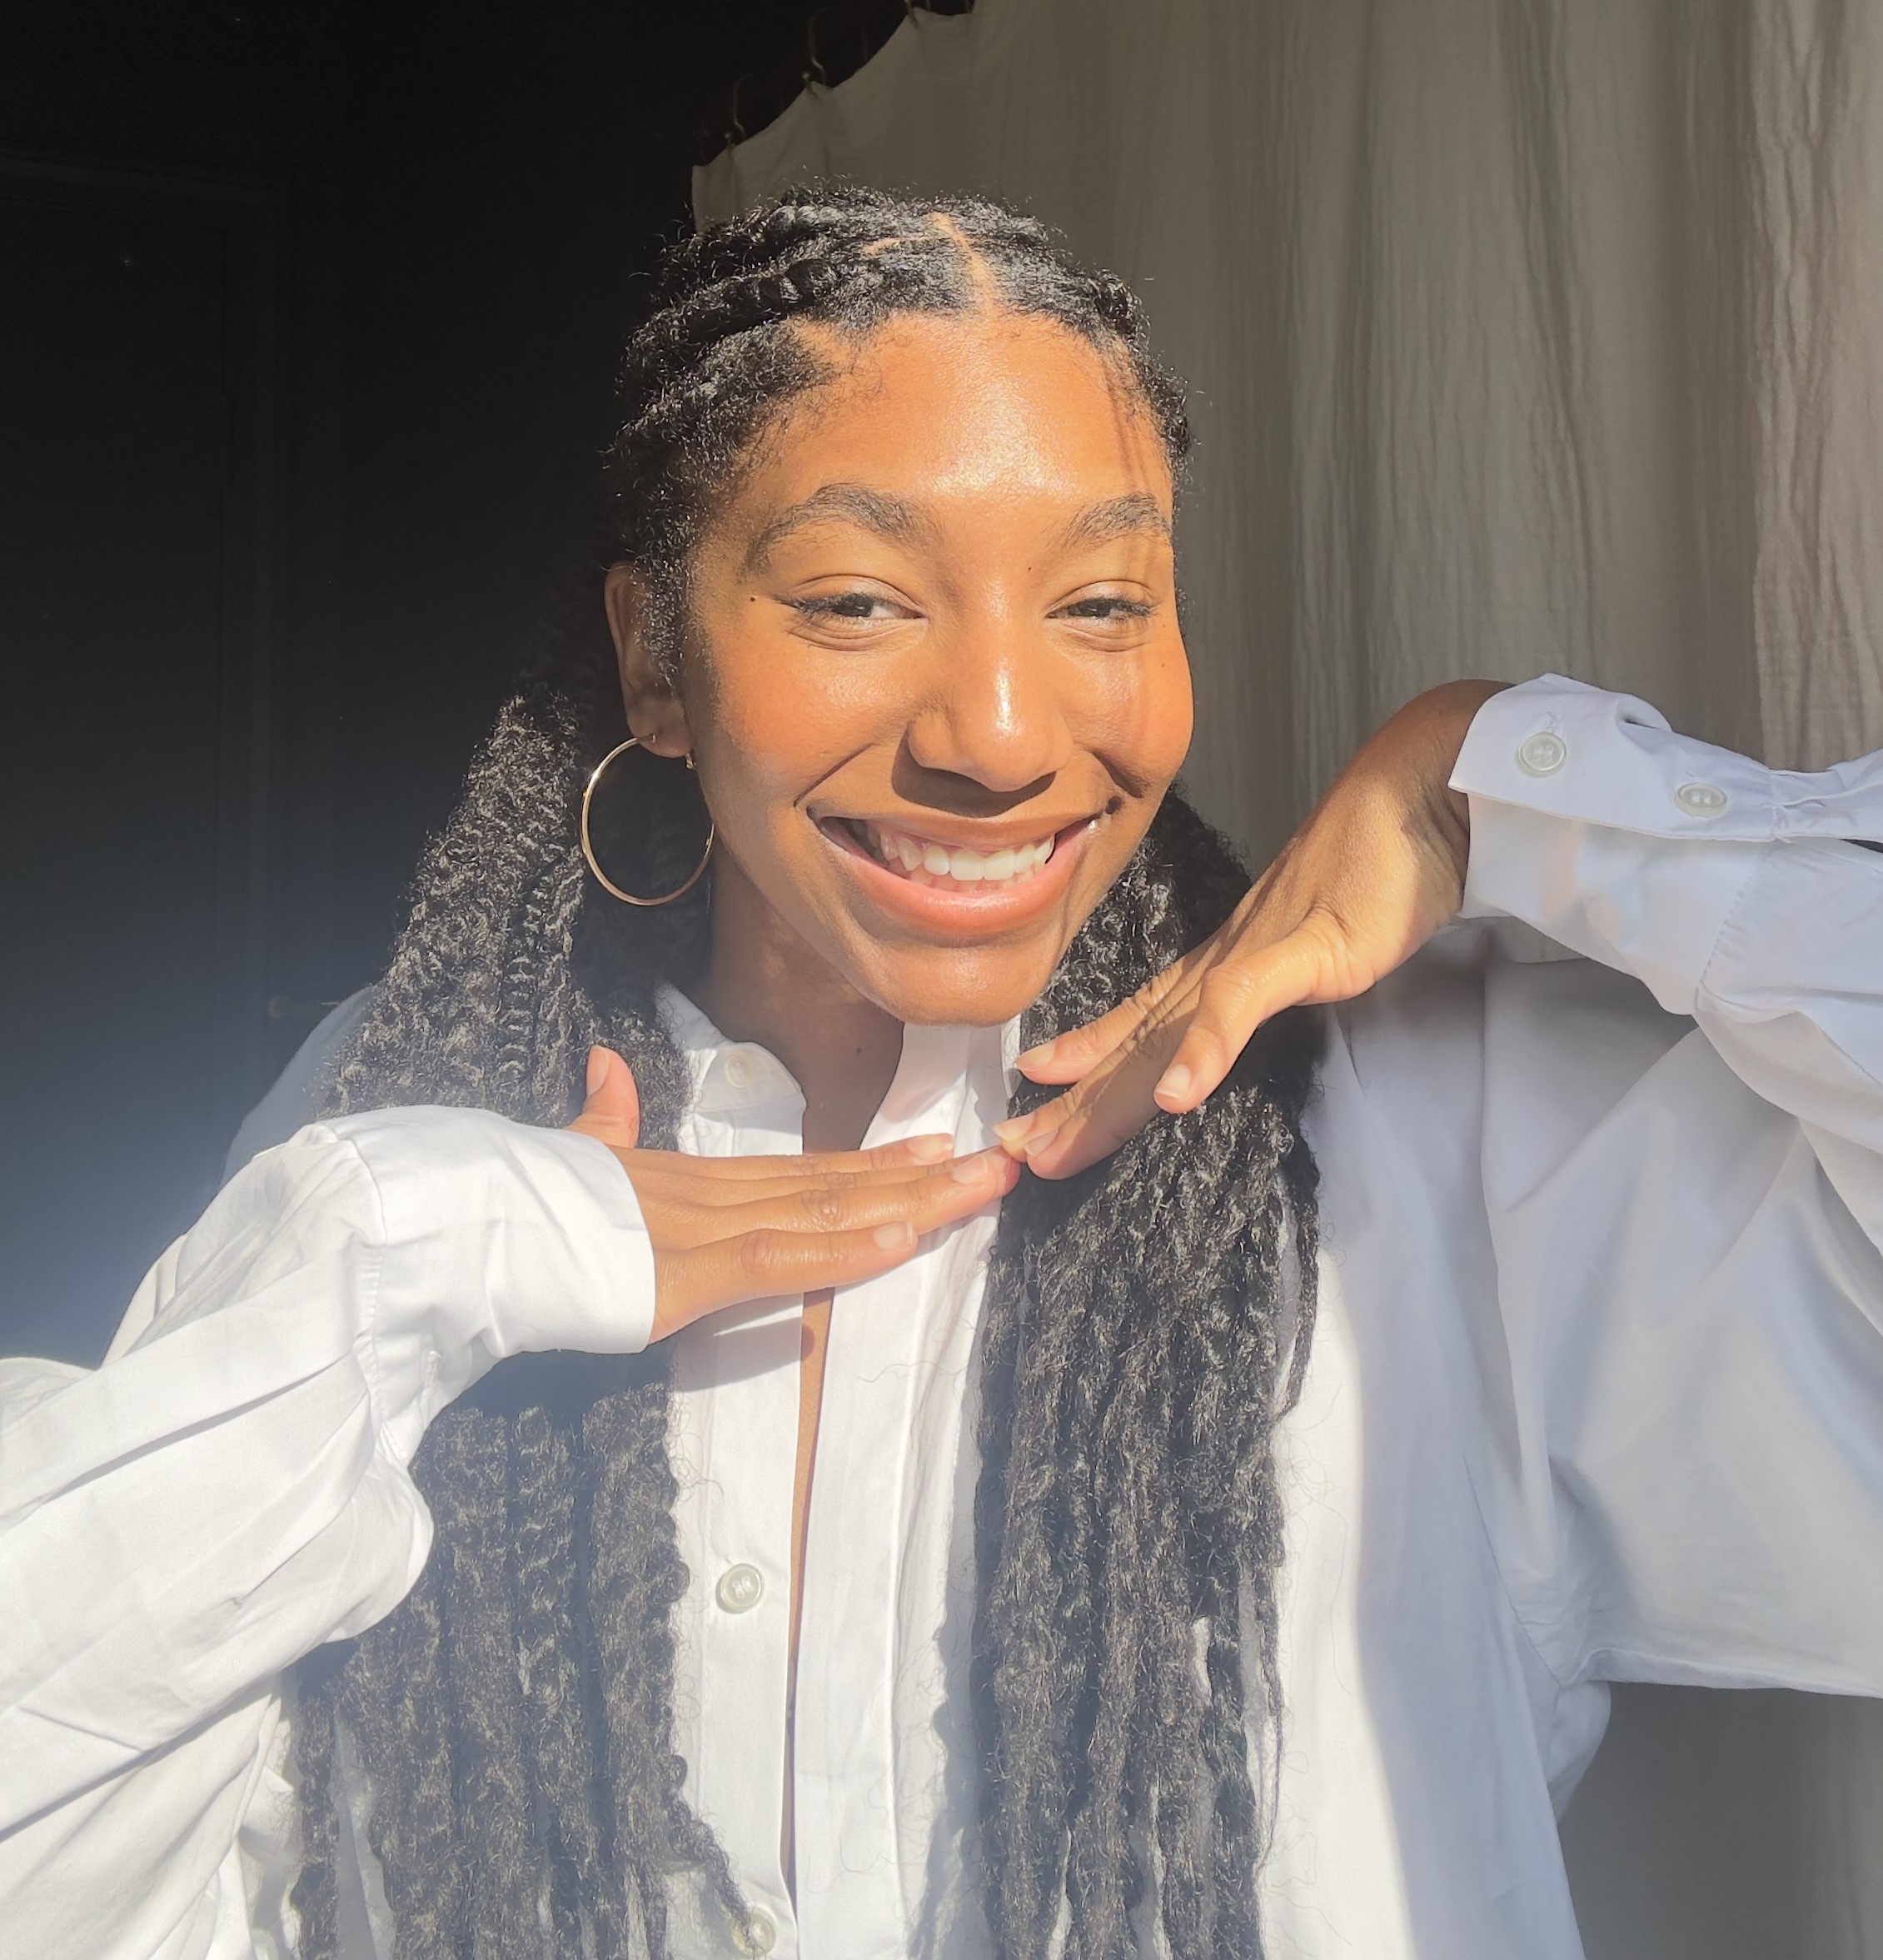 Light skinned Black female with long twists and gold hoop earrings wearing a white button down blouse smiles while holding hands together under her chin to frame her face